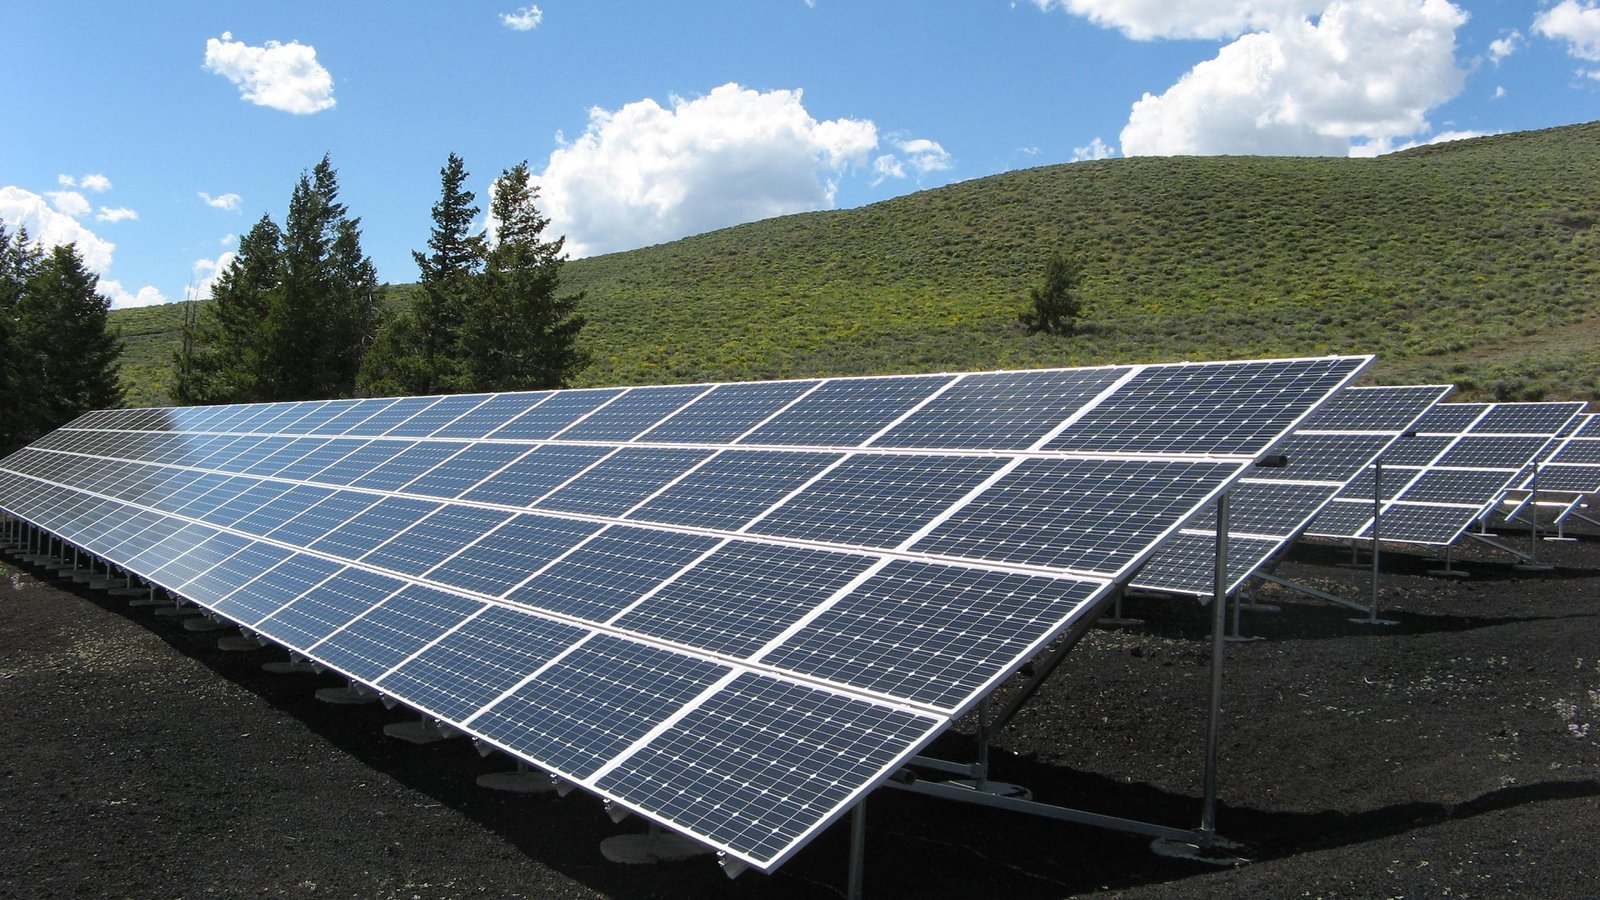 Solar Panels installed to produce electricity